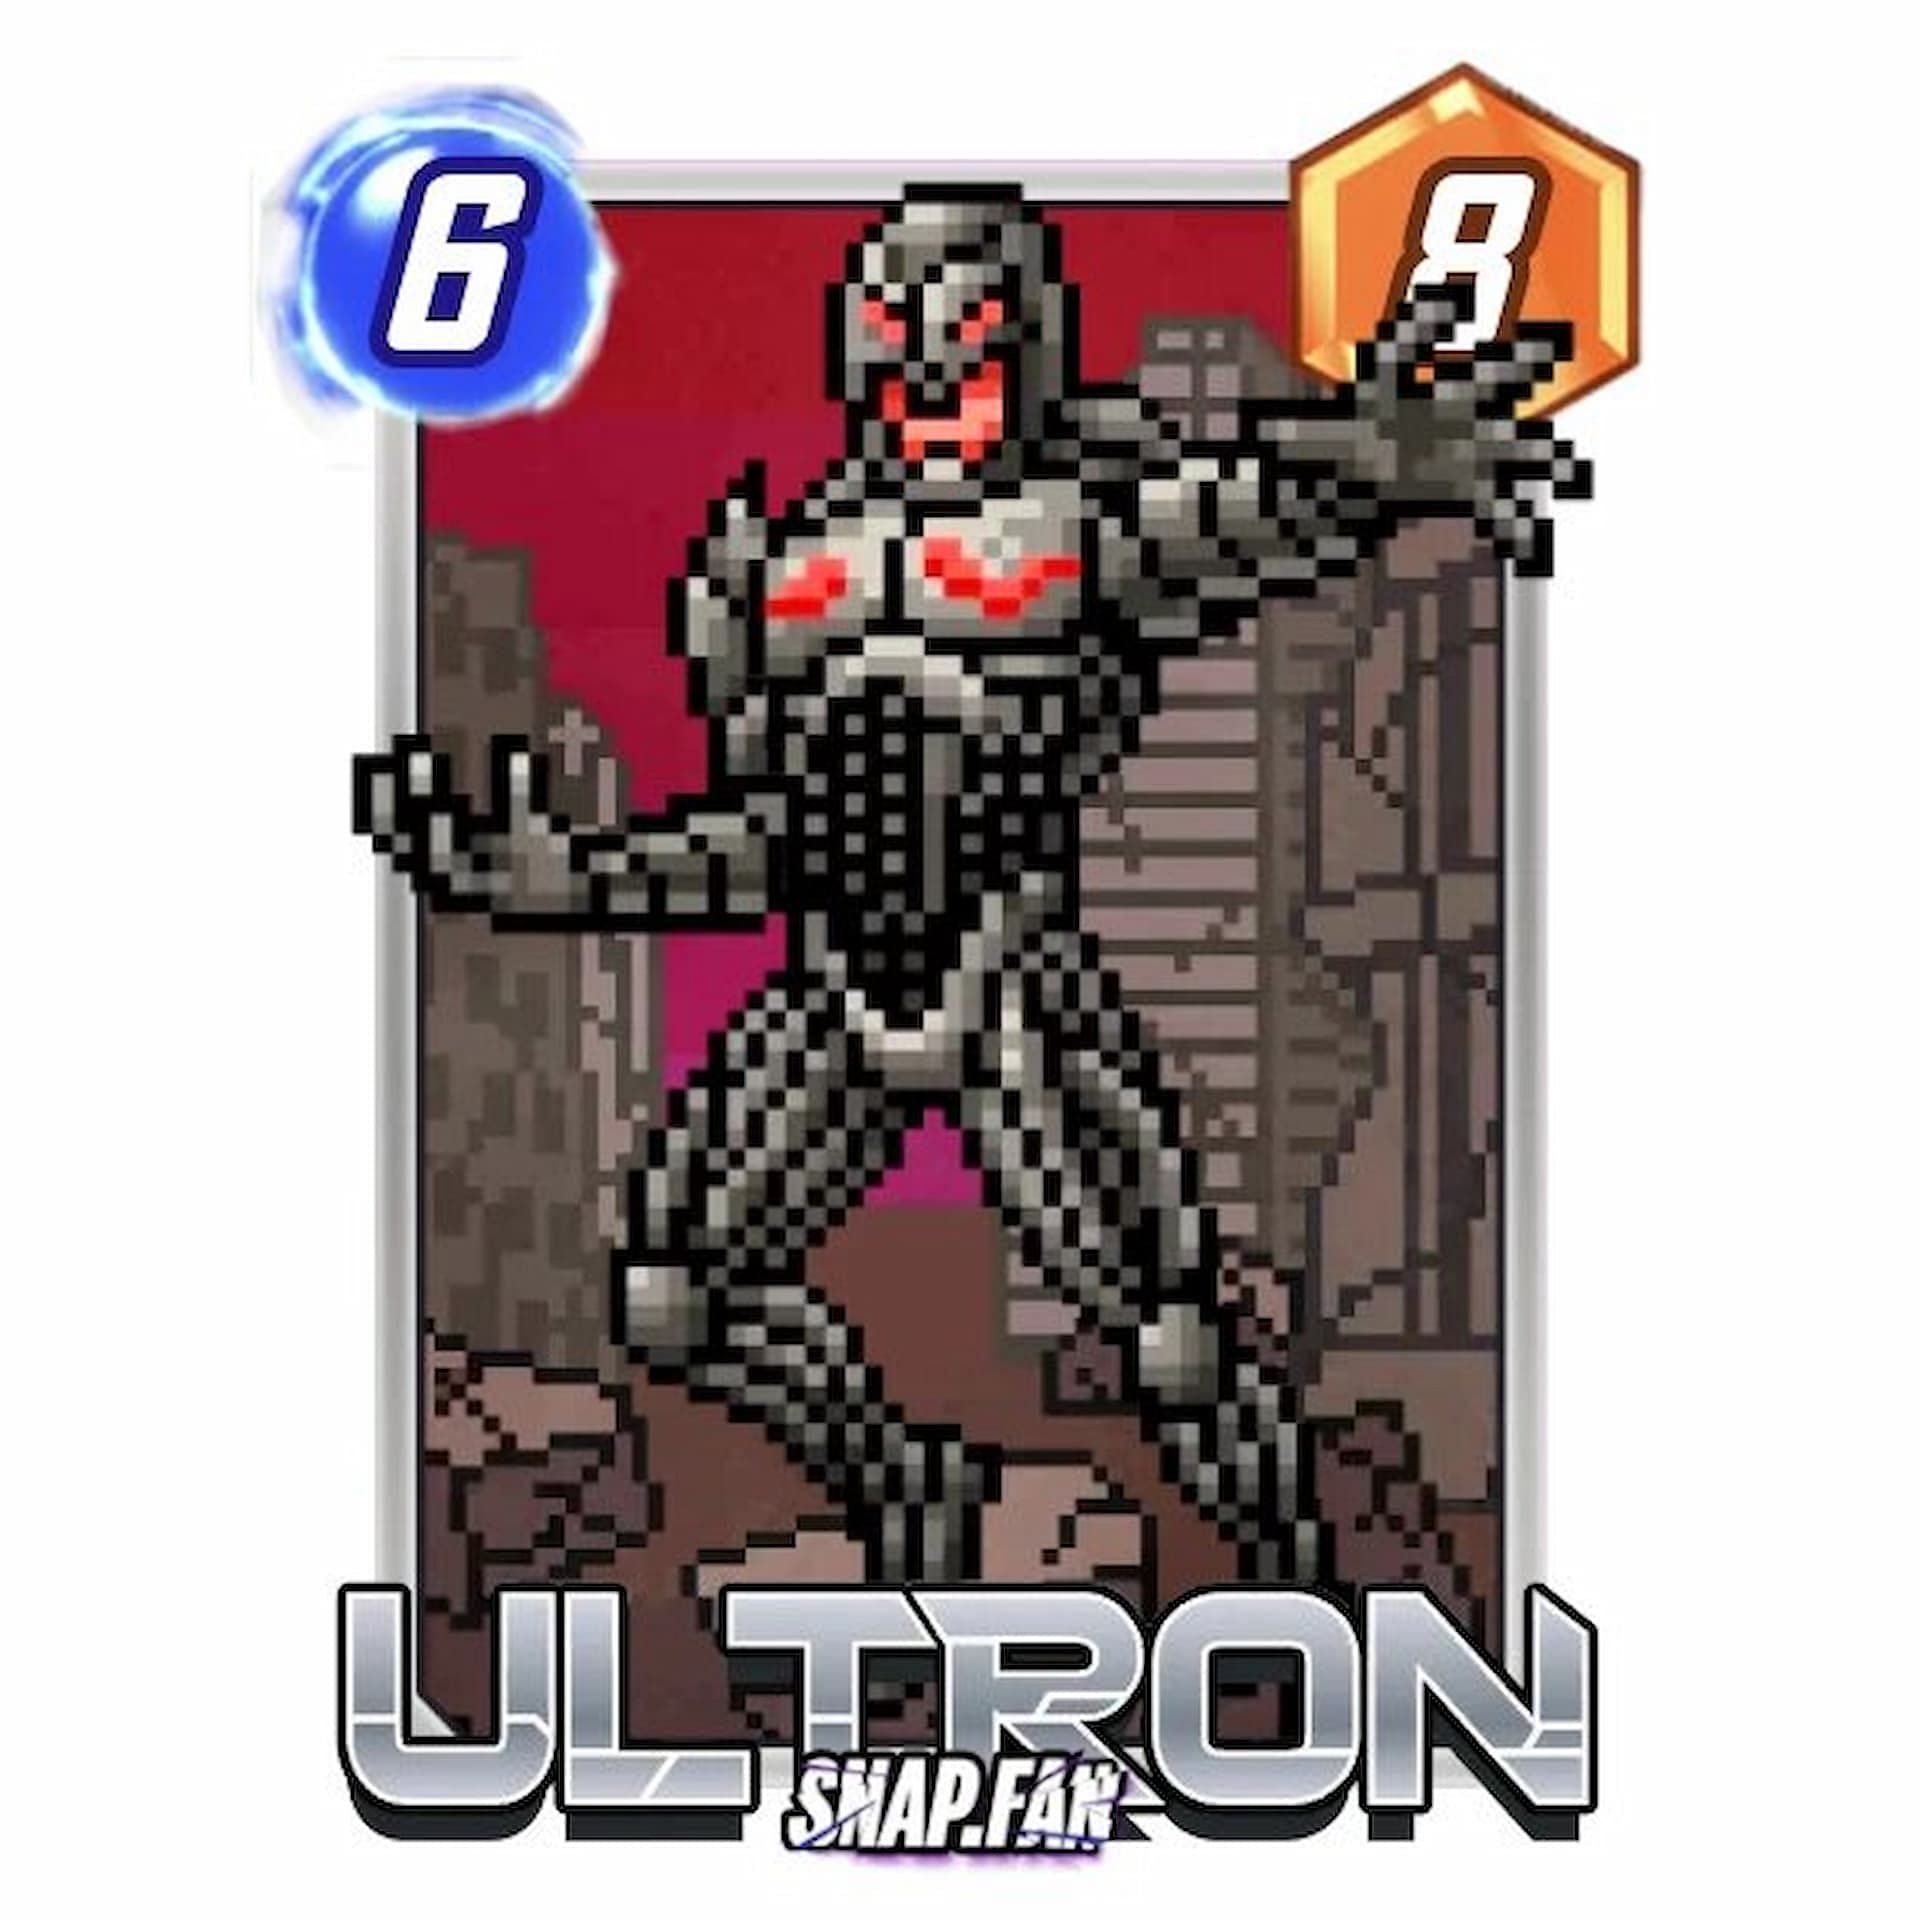 Pixelated Ultron variant (Image via Snap.fan and Nuverse)